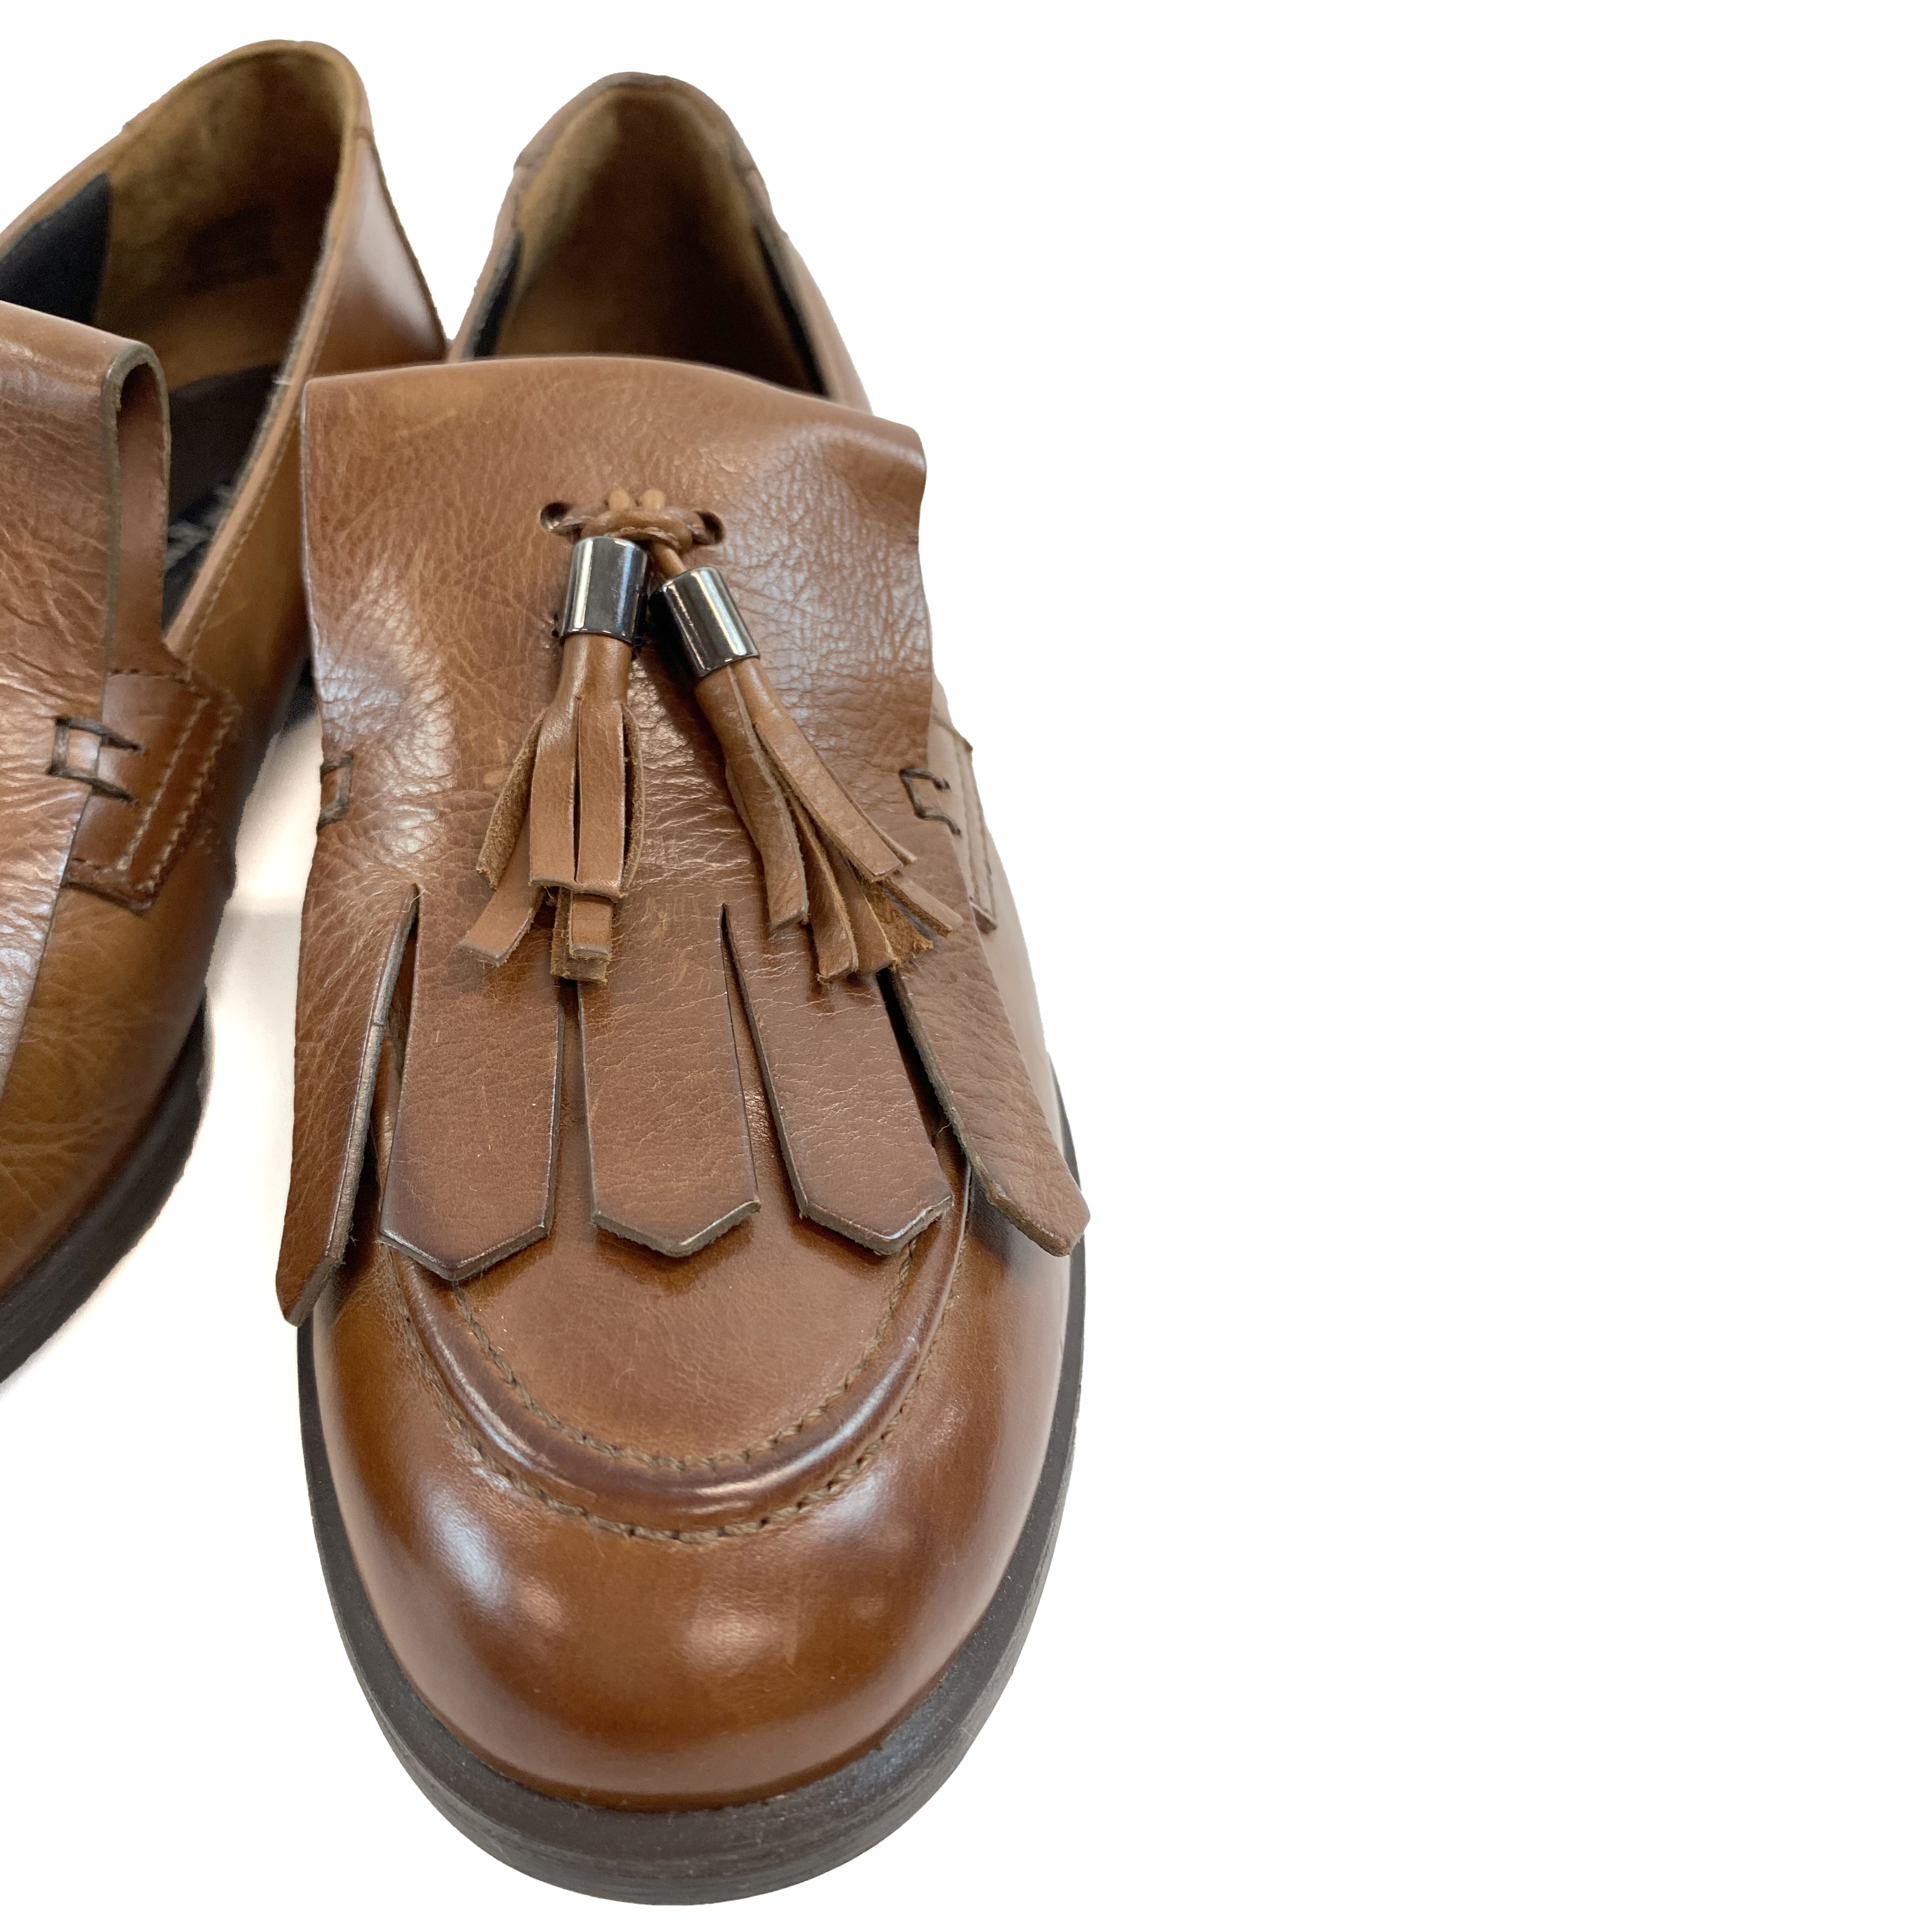 Paul Green Leather Oxford Loafers